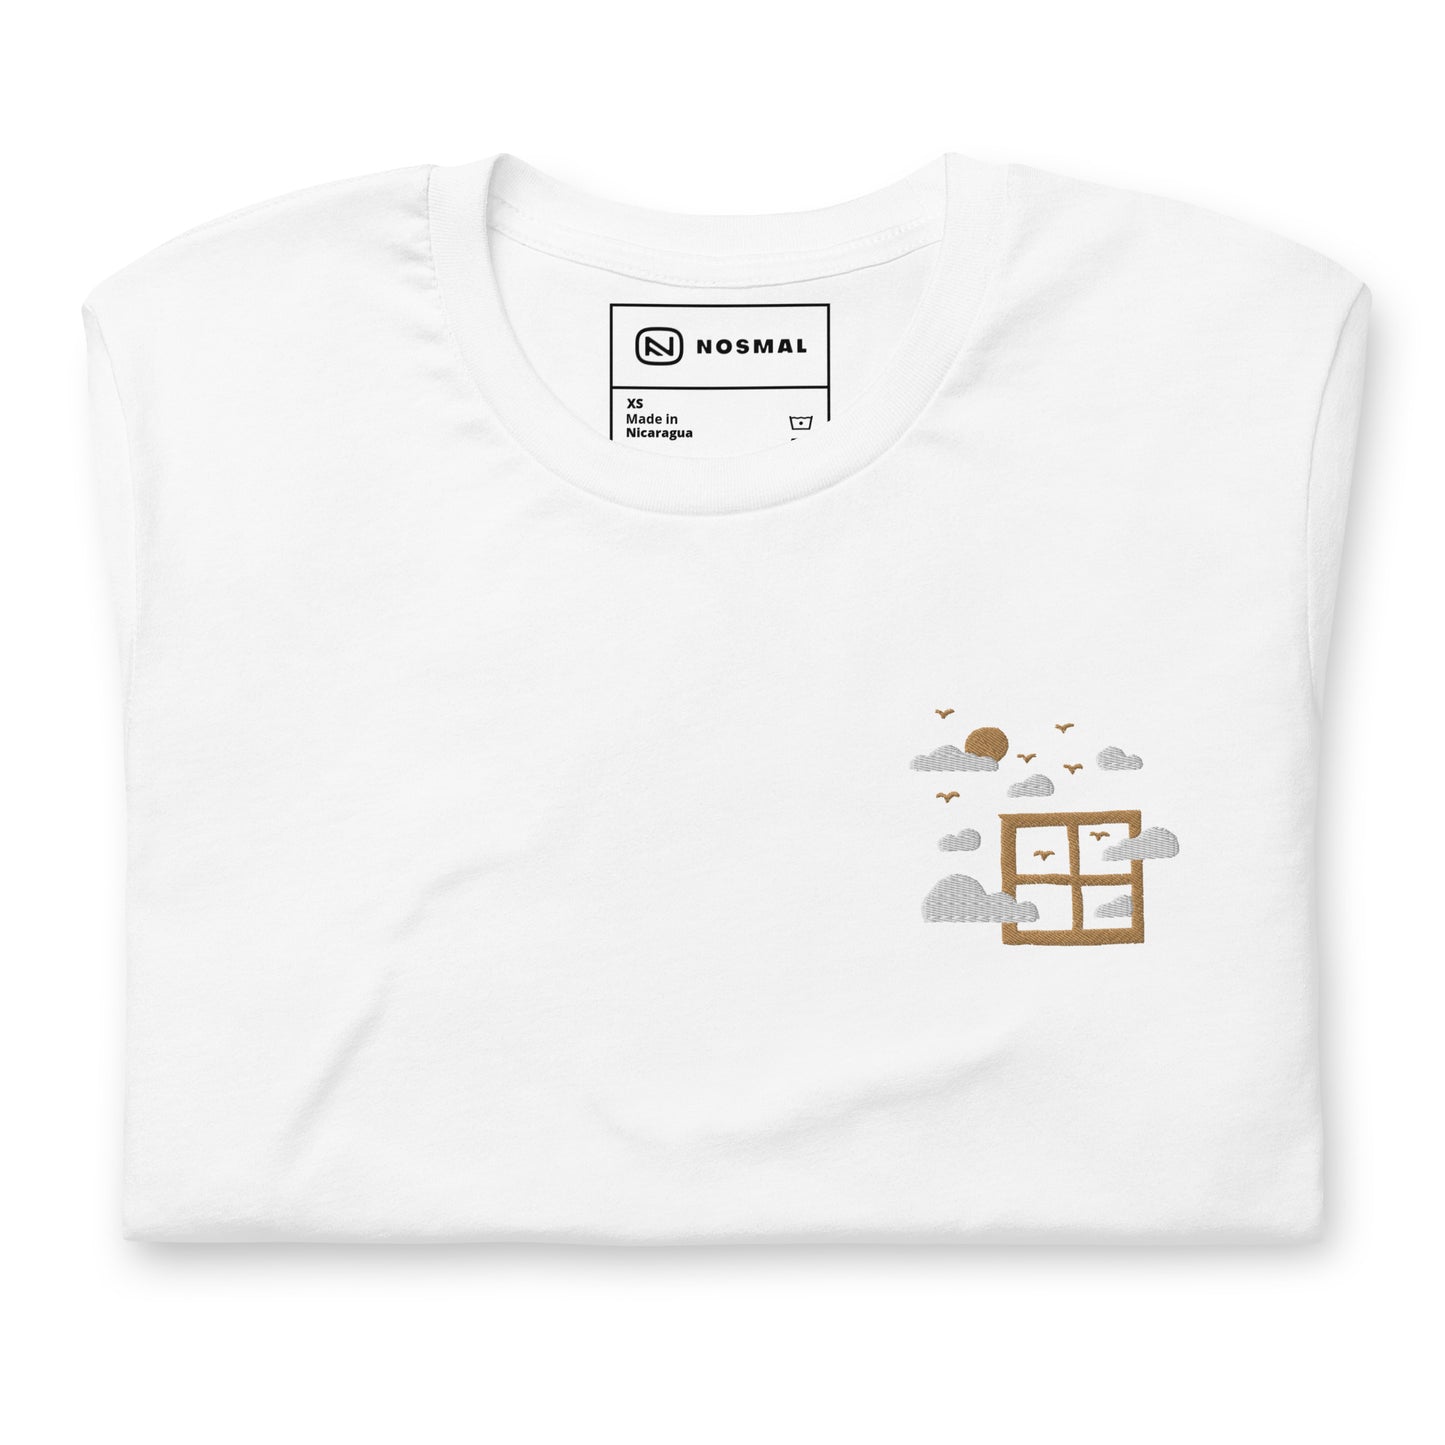 Top down view of fresh air embroidered design on white unisex t-shirt.